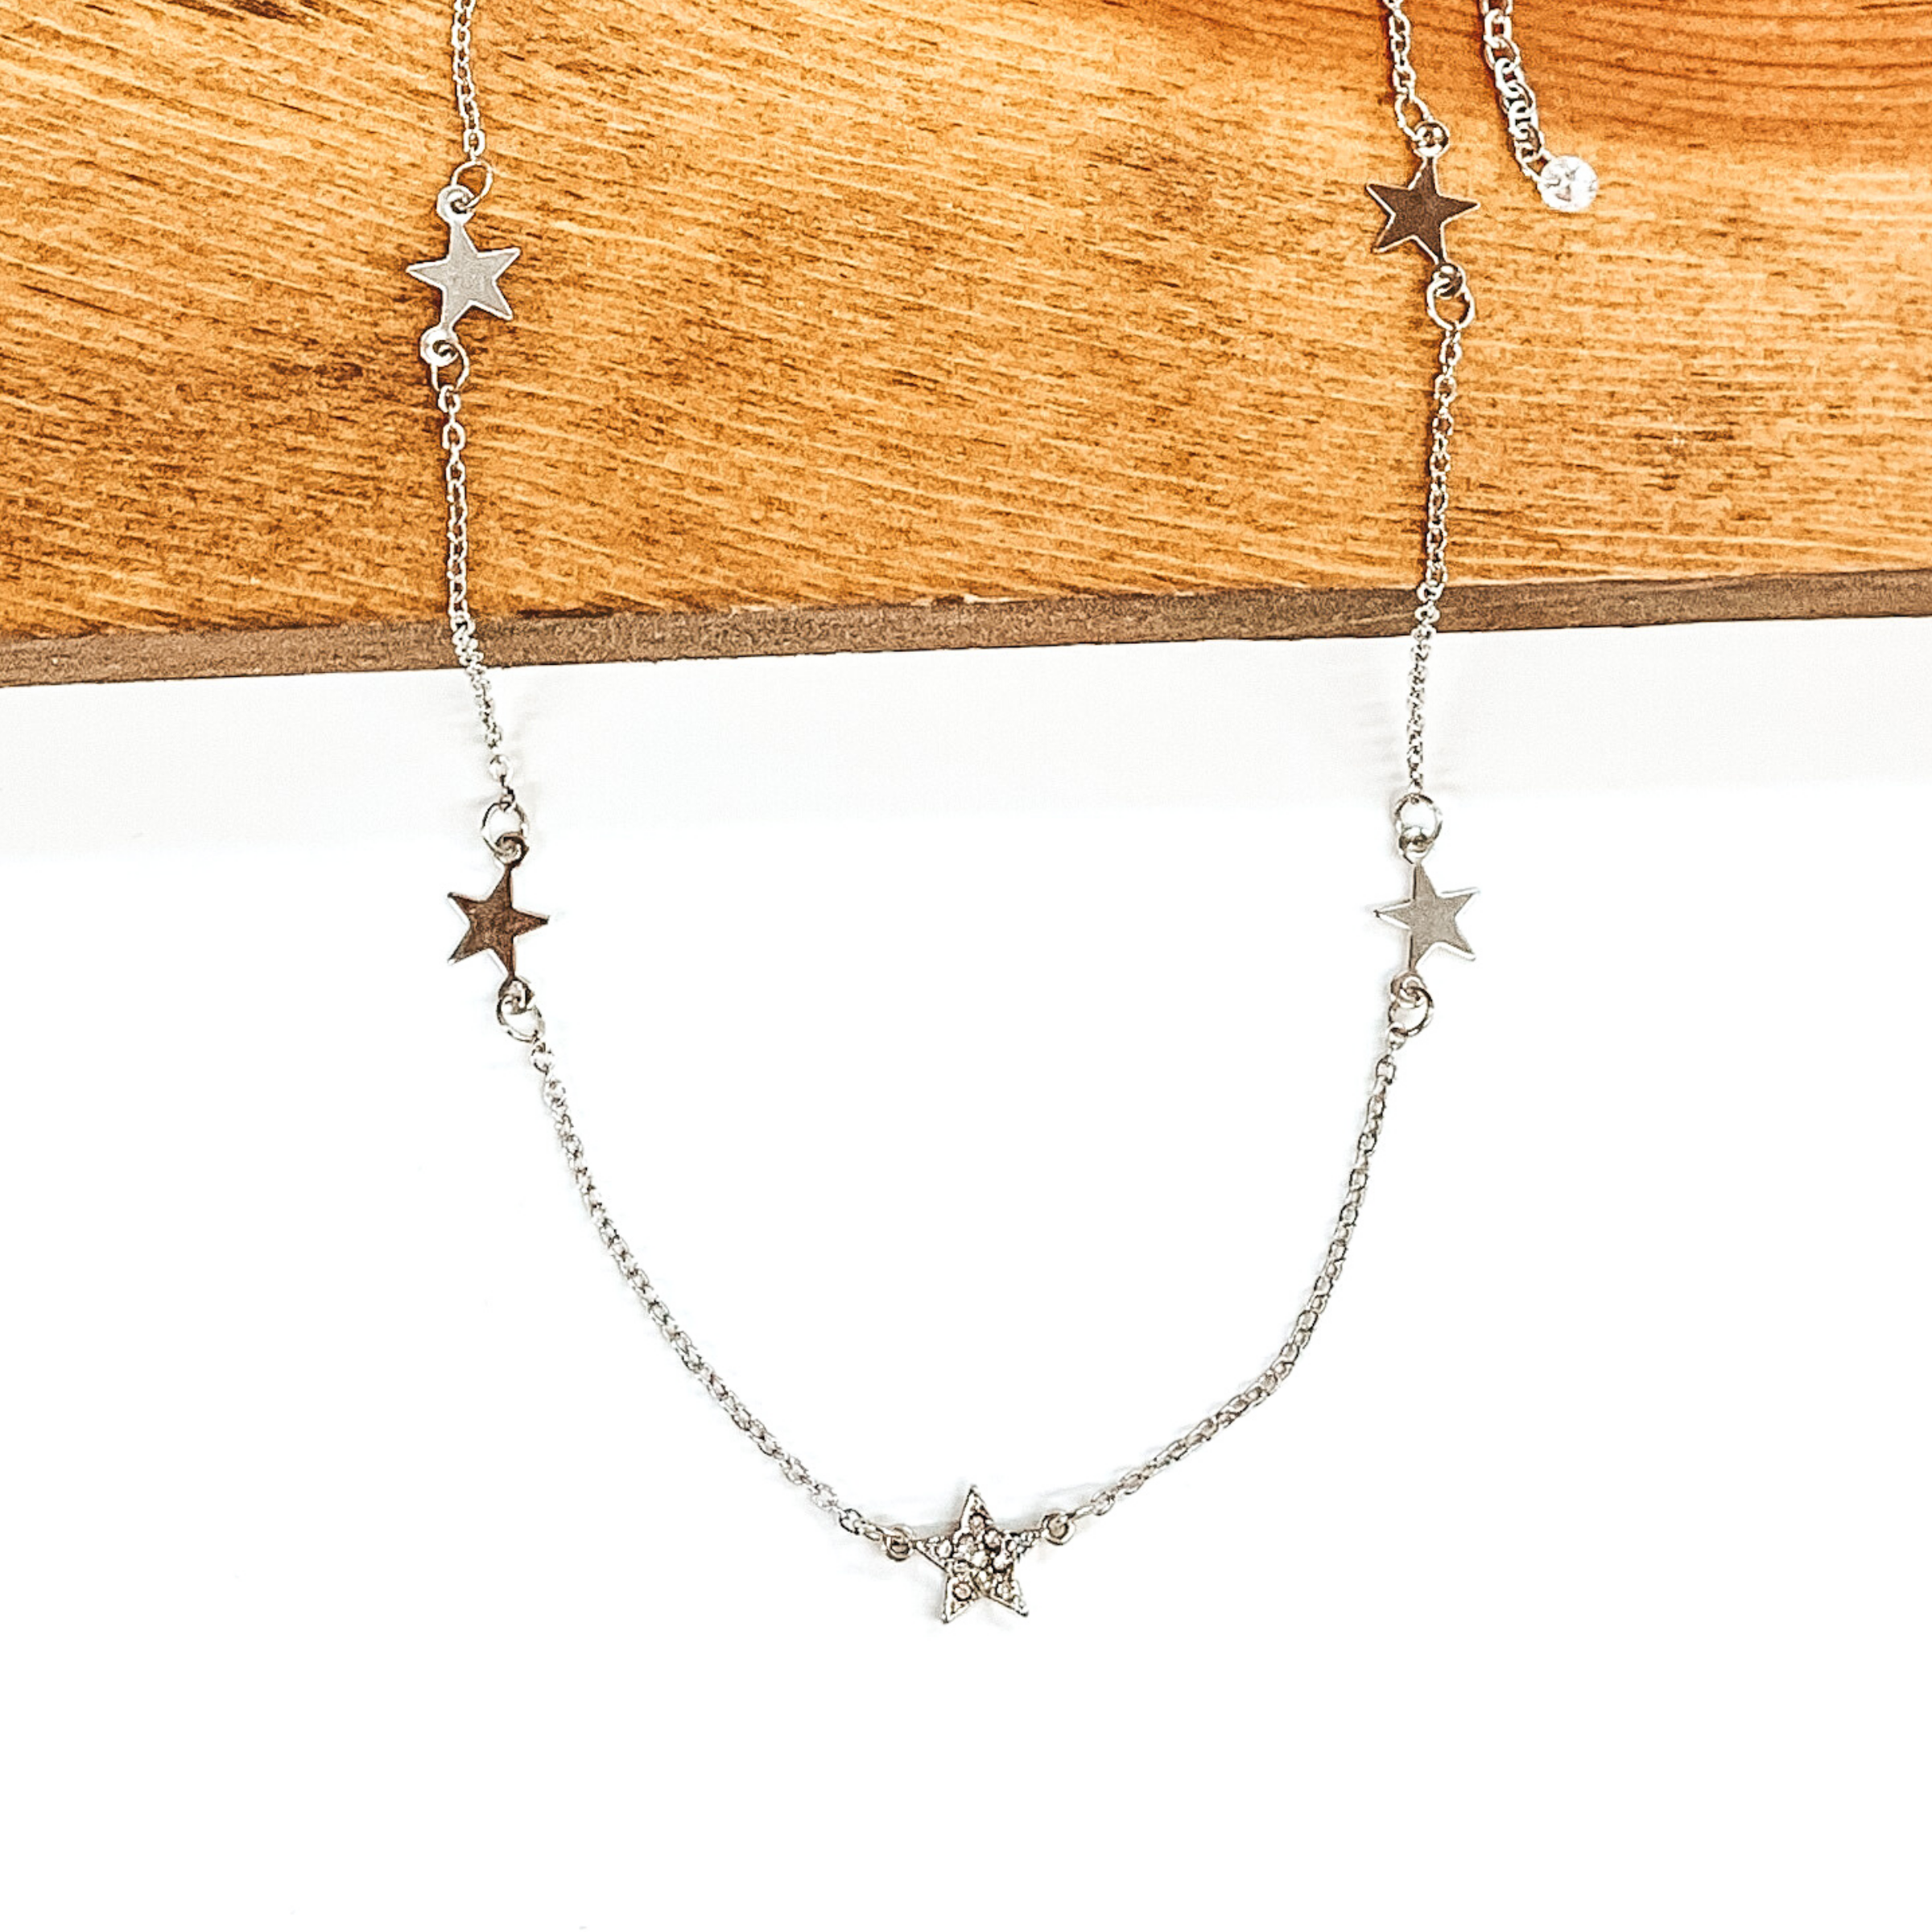 Silver chained necklace with silver star spacers. The middle star spacer has clear crystal on it. This necklace is pictured laying partially on a piece of wood on a white background. 